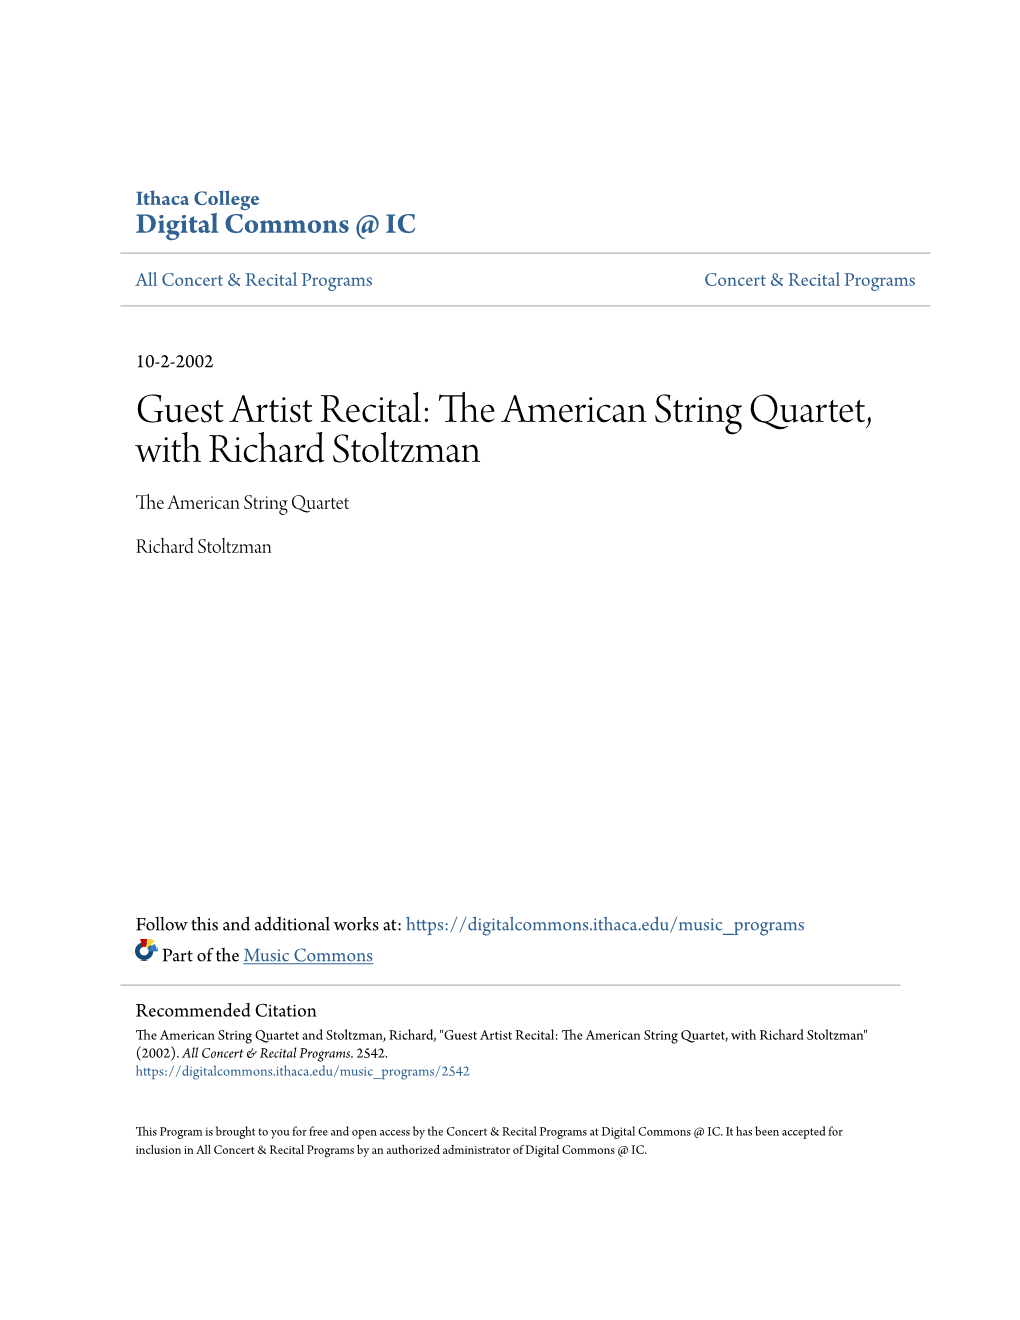 The American String Quartet, with Richard Stoltzman the American String Quartet